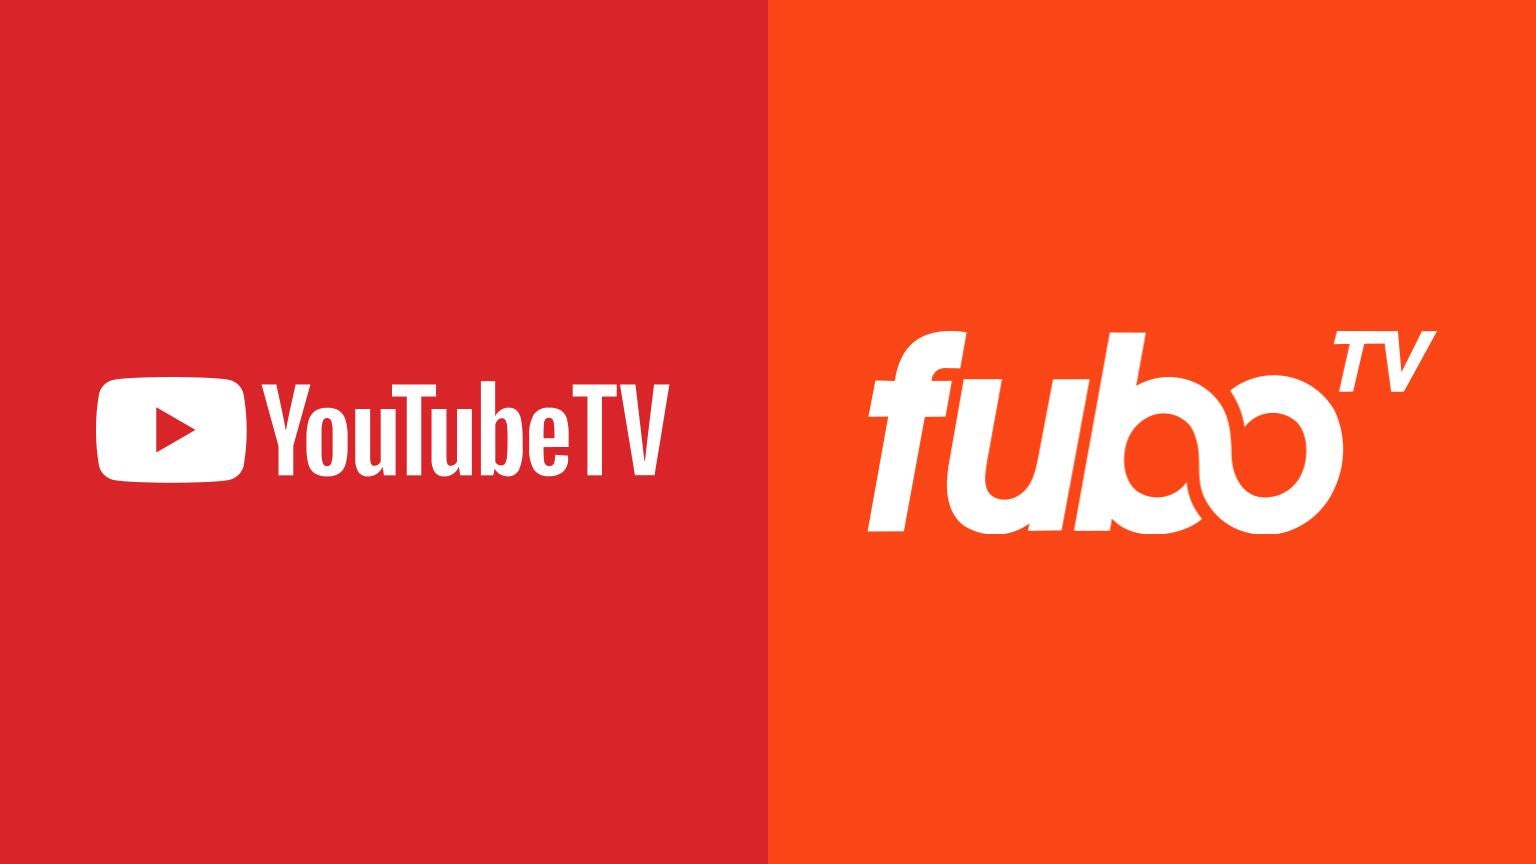 Youtube Tv Vs Fubotv - Which Should You Choose The Streamable